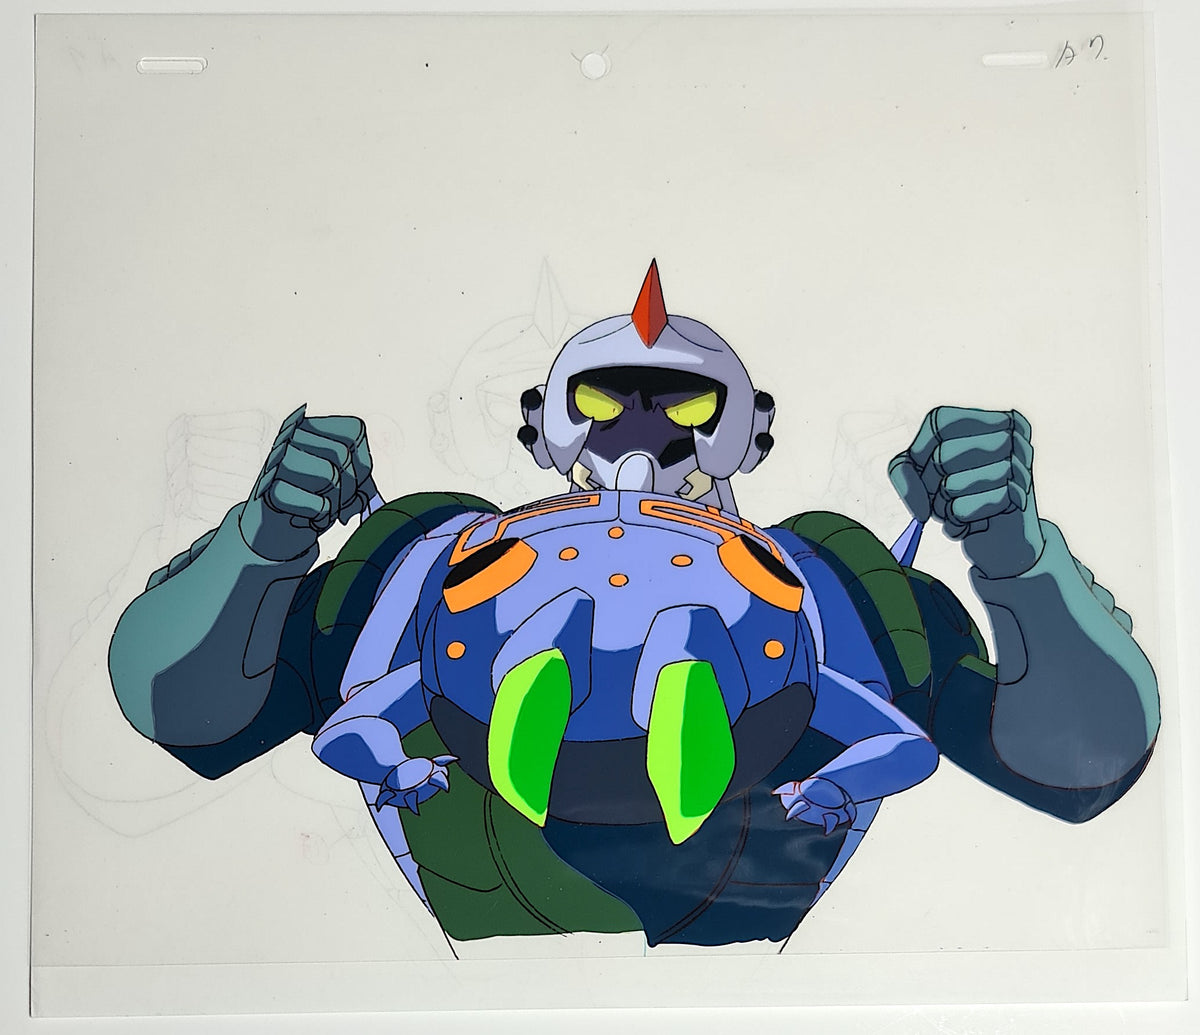 Transformers Beast Wars Neo Production Animation Cel - 3114